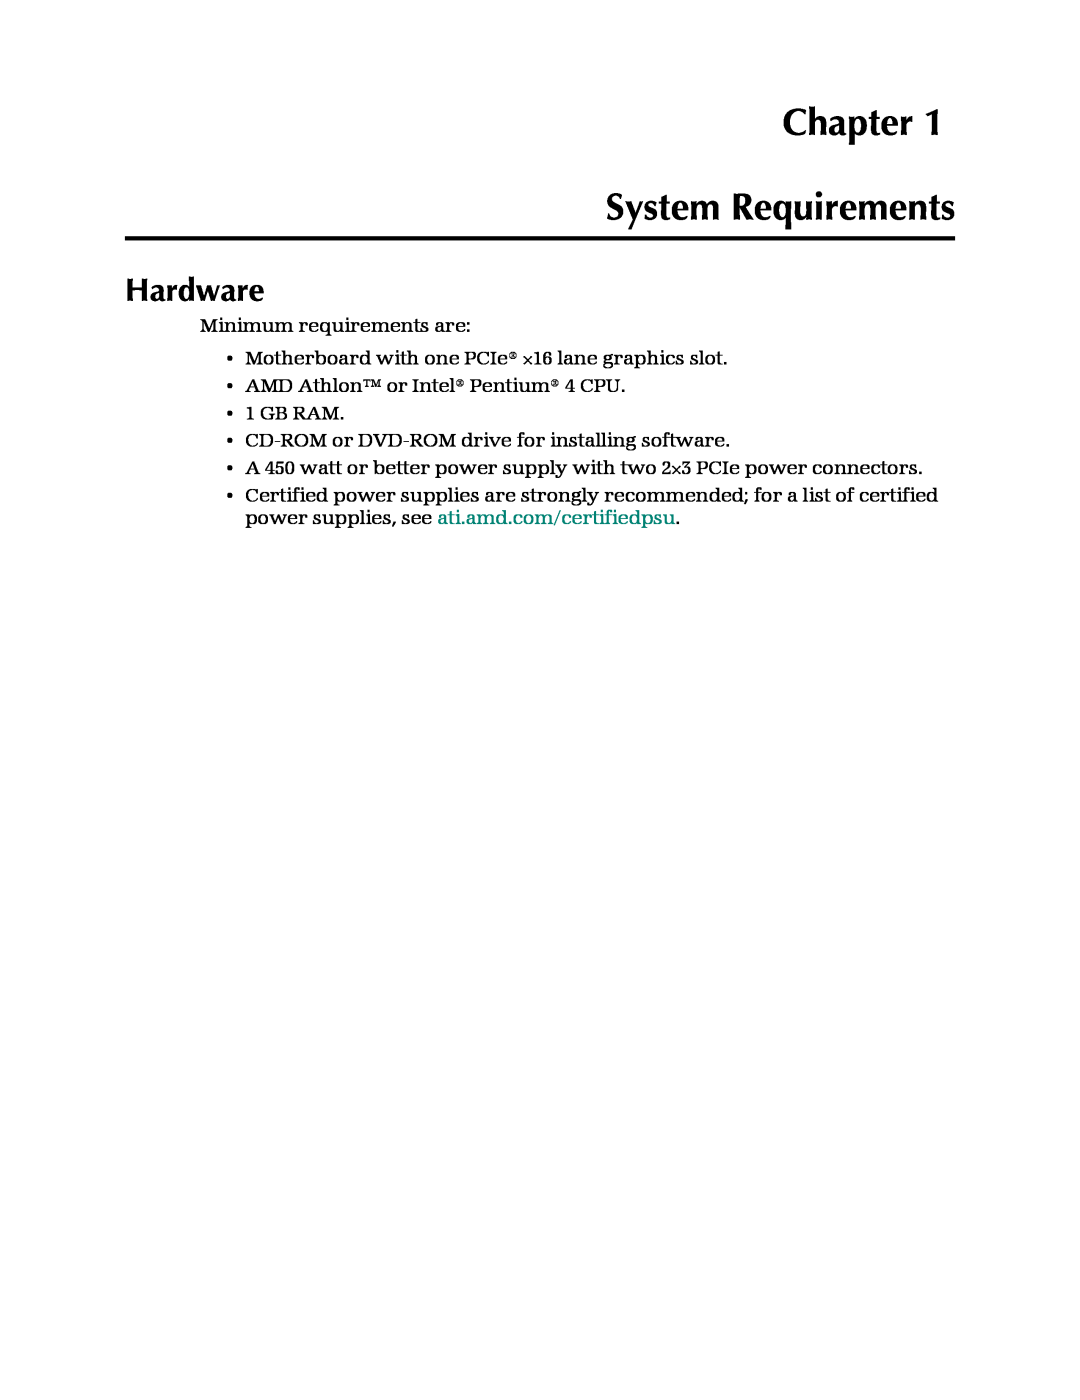 AMD 4850 manual Chapter System Requirements, Hardware 